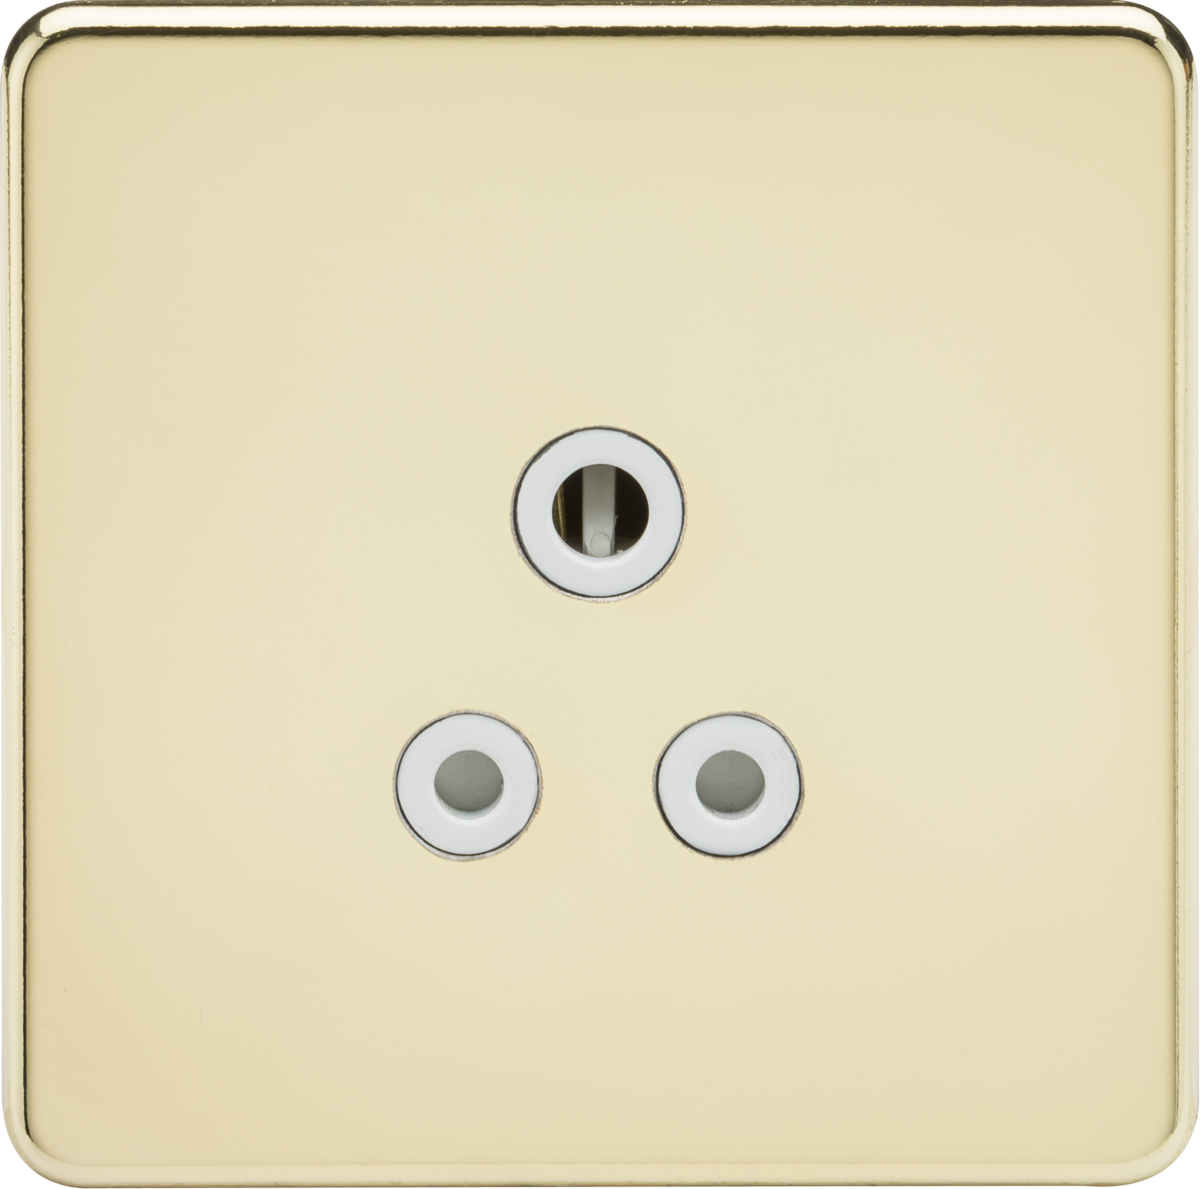 Screwless 5A Unswitched Socket - Polished Brass with White Insert